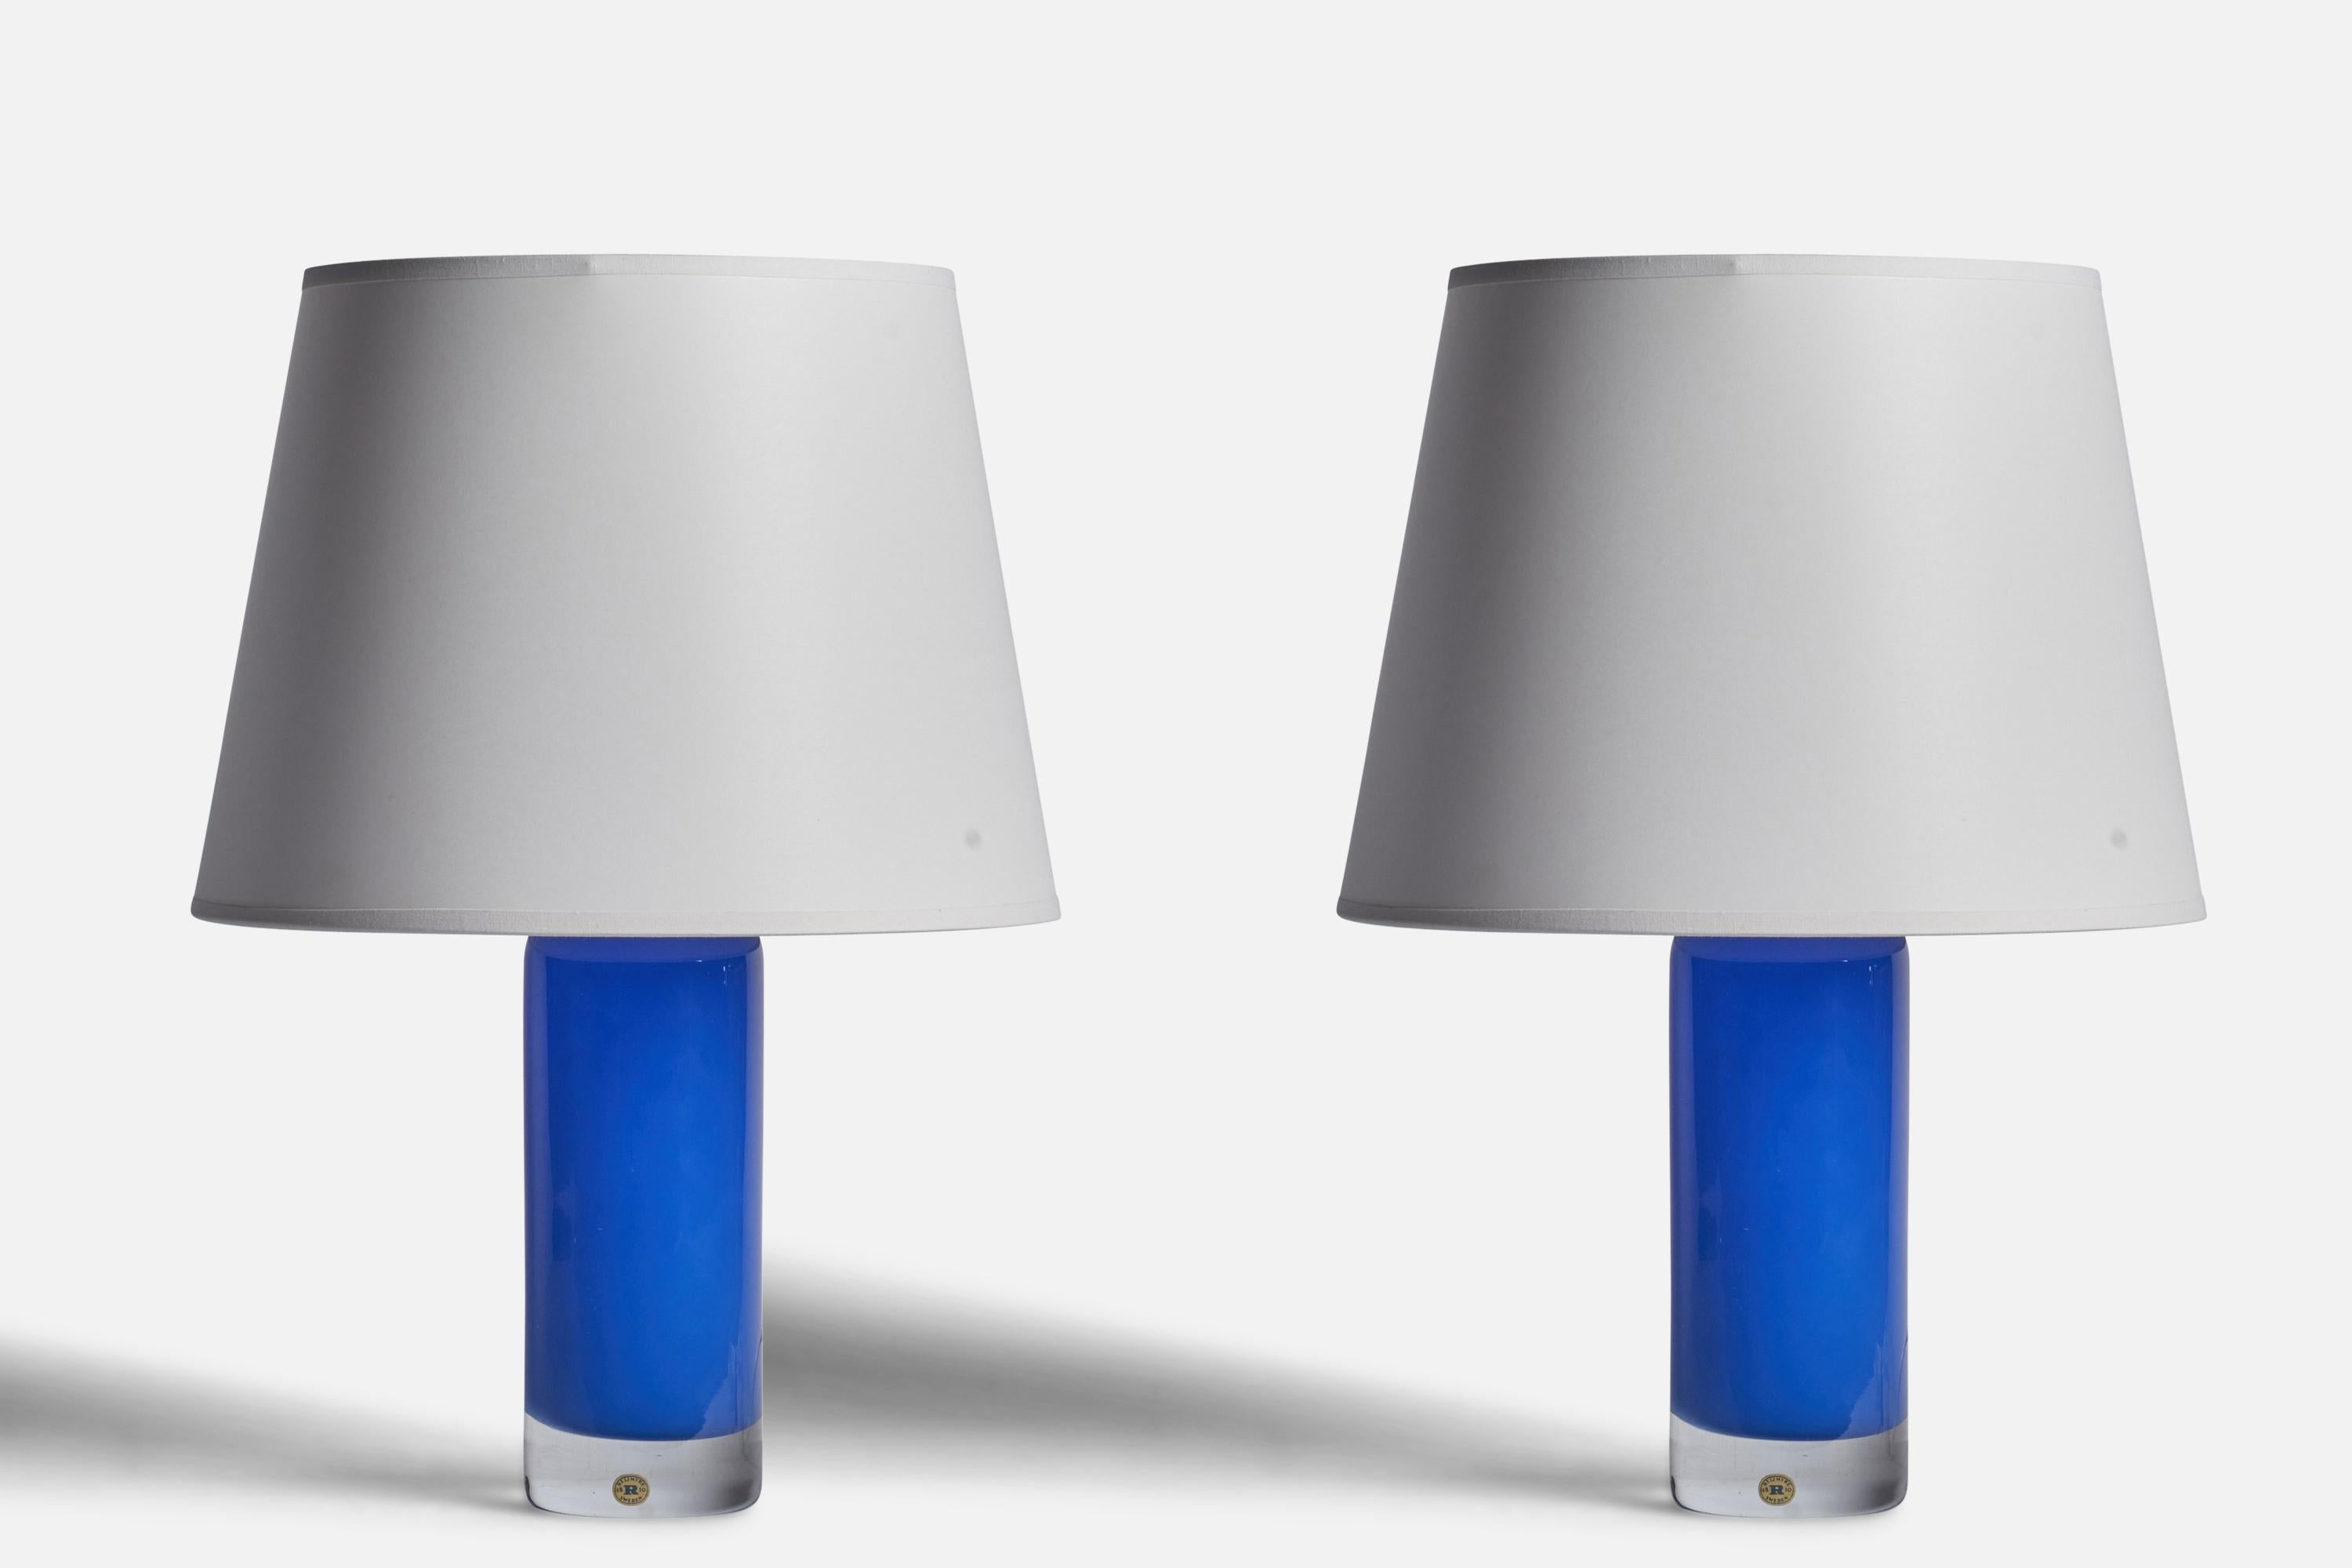 A pair of blue-coloured glass table lamps produced by Reijmyre Glasbruk, Sweden, 1950s.

Dimensions of Lamp (inches): 12” H x 3.15” Diameter
Dimensions of Shade (inches): 9” Top Diameter x 12” Bottom Diameter x 9” H
Dimensions of Lamp with Shade